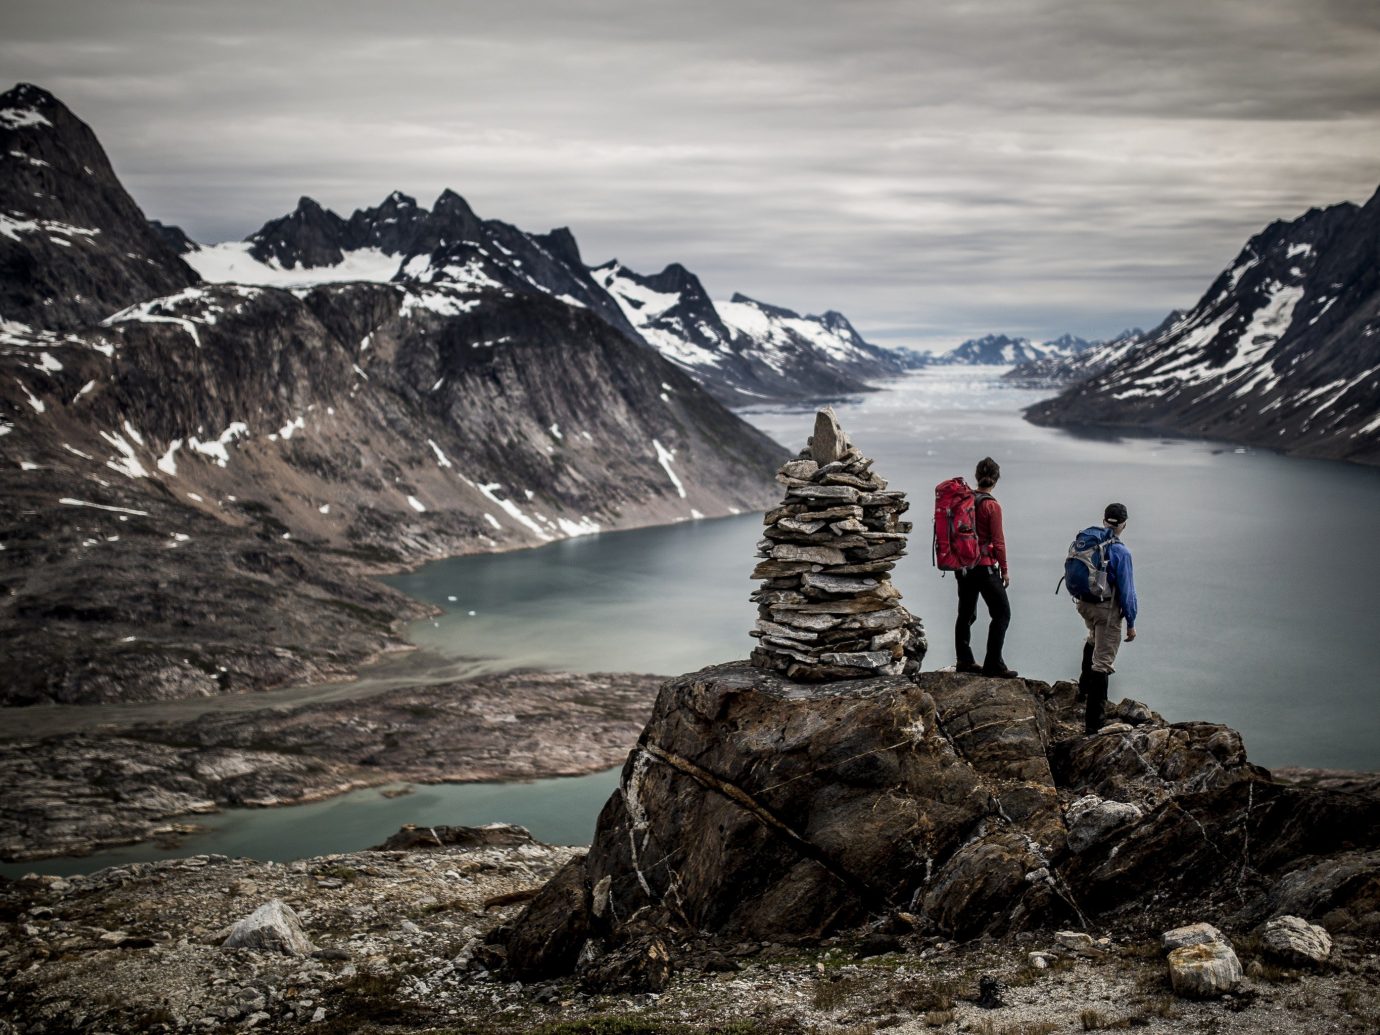 Hikers overlook the sound near Tiniteqilaaq in East Greenland